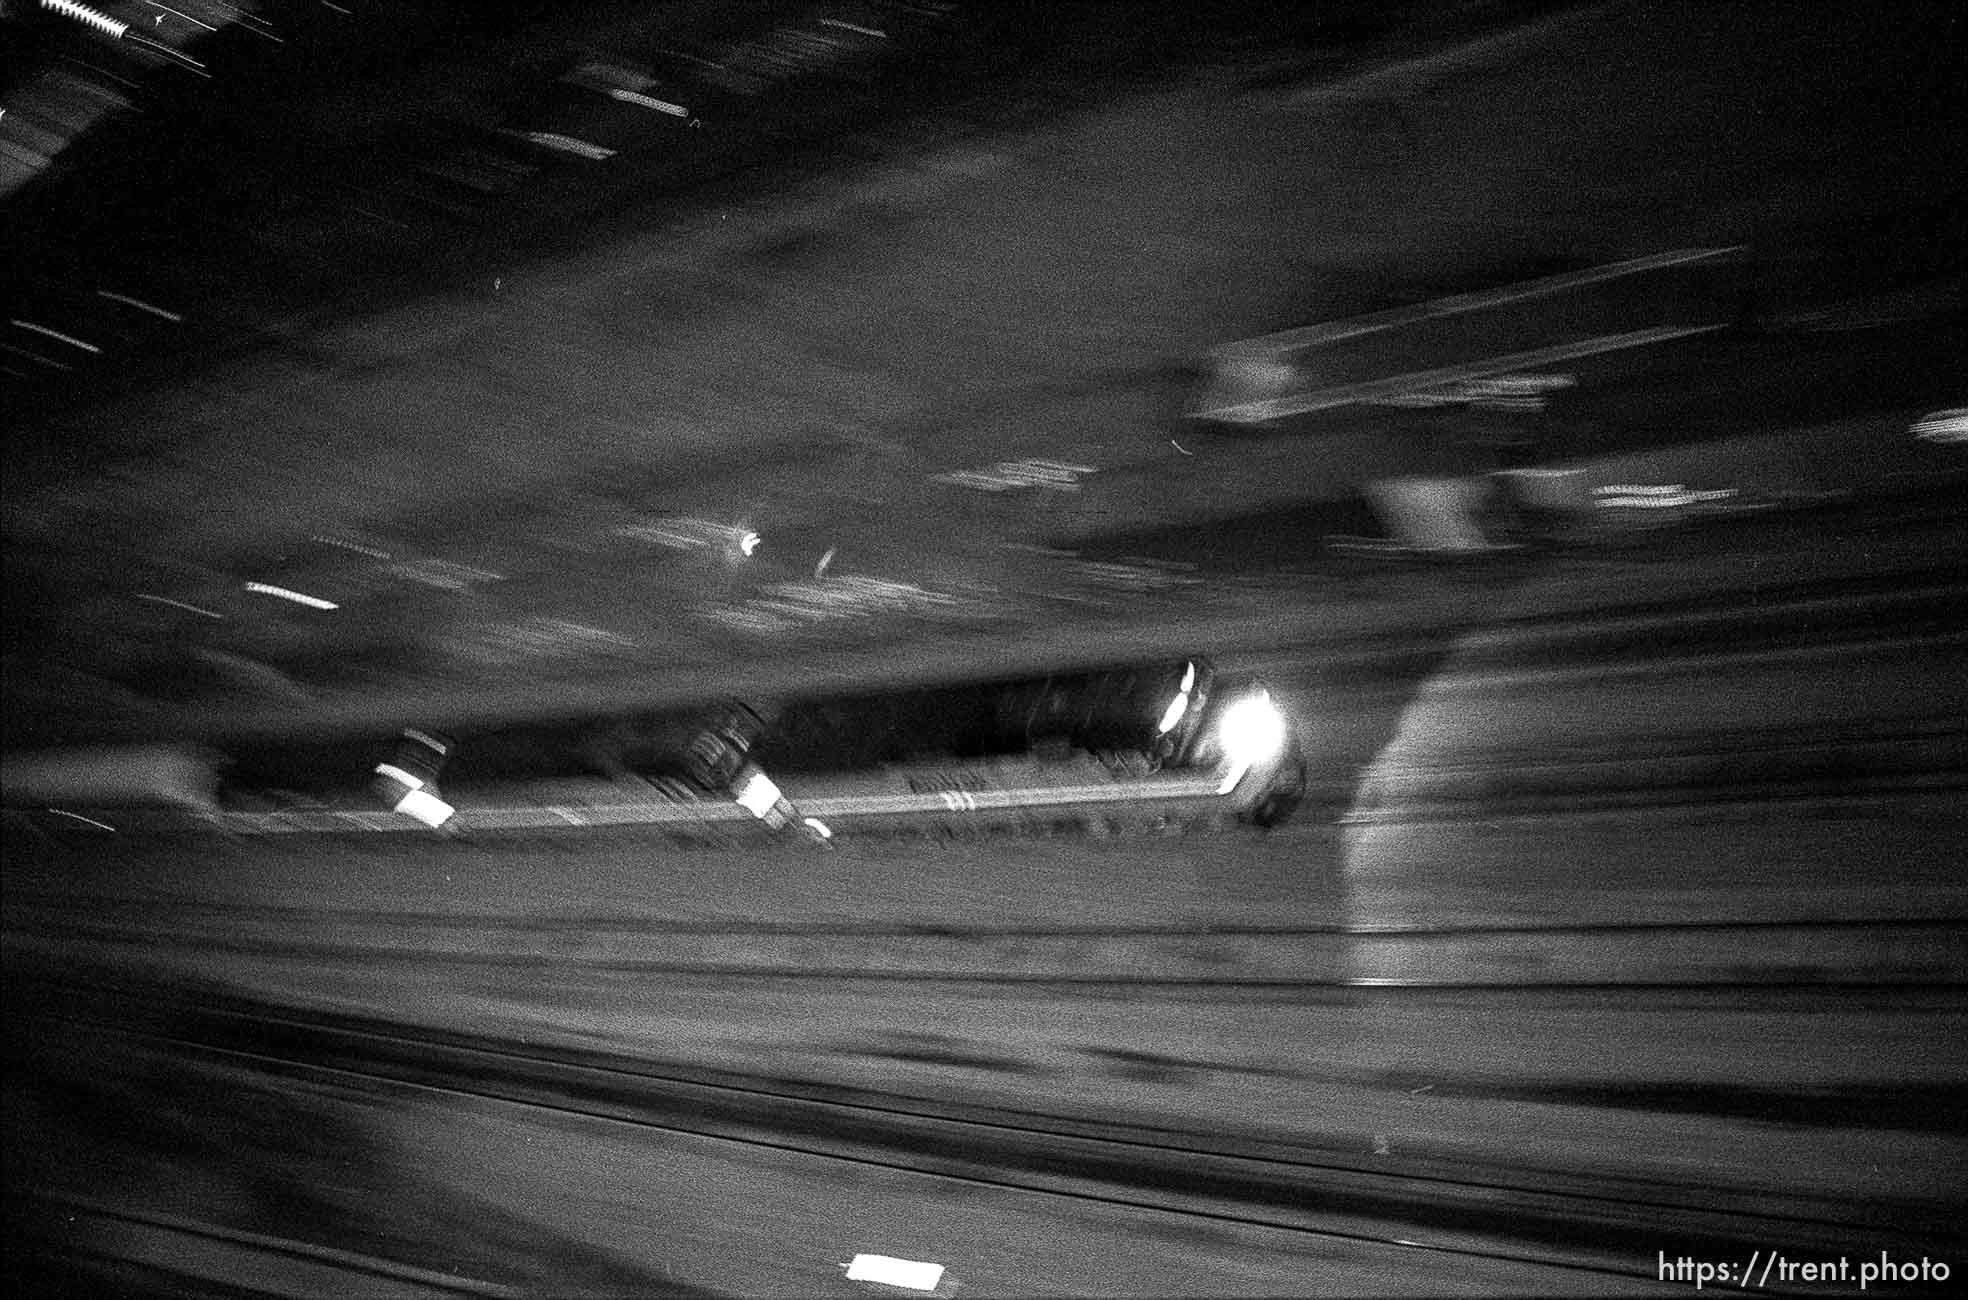 Train Yard from above, at night